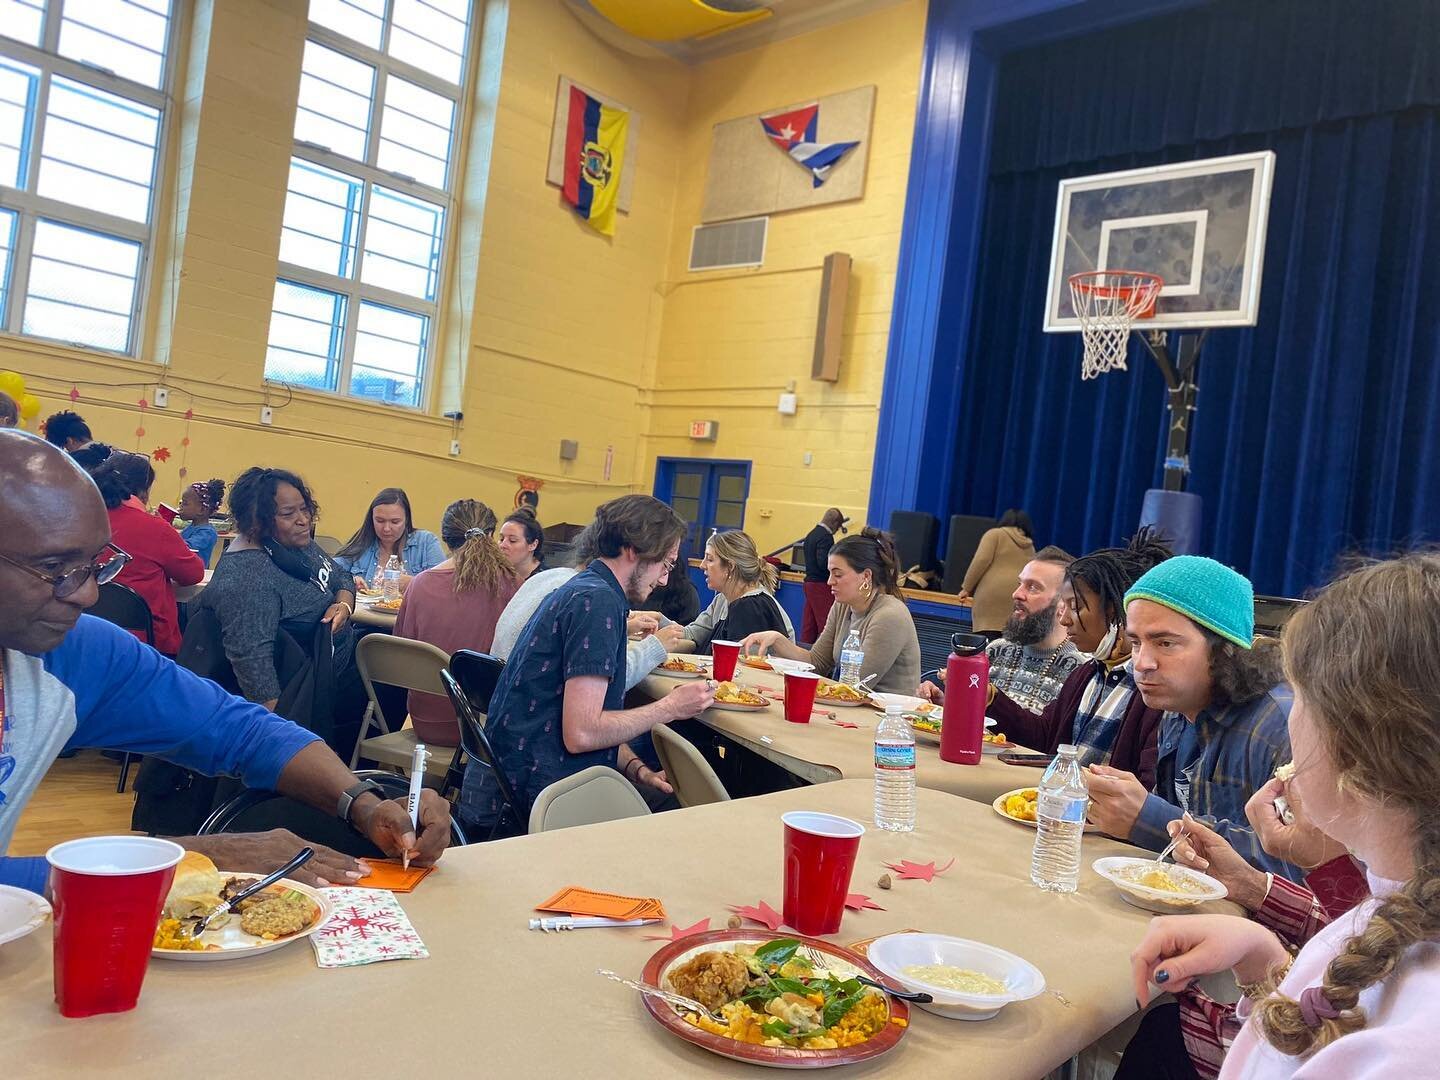 Tyler staff Friendsgiving 🧡 Thankful for our community! Thank you to hospitality committee for such a beautiful event!